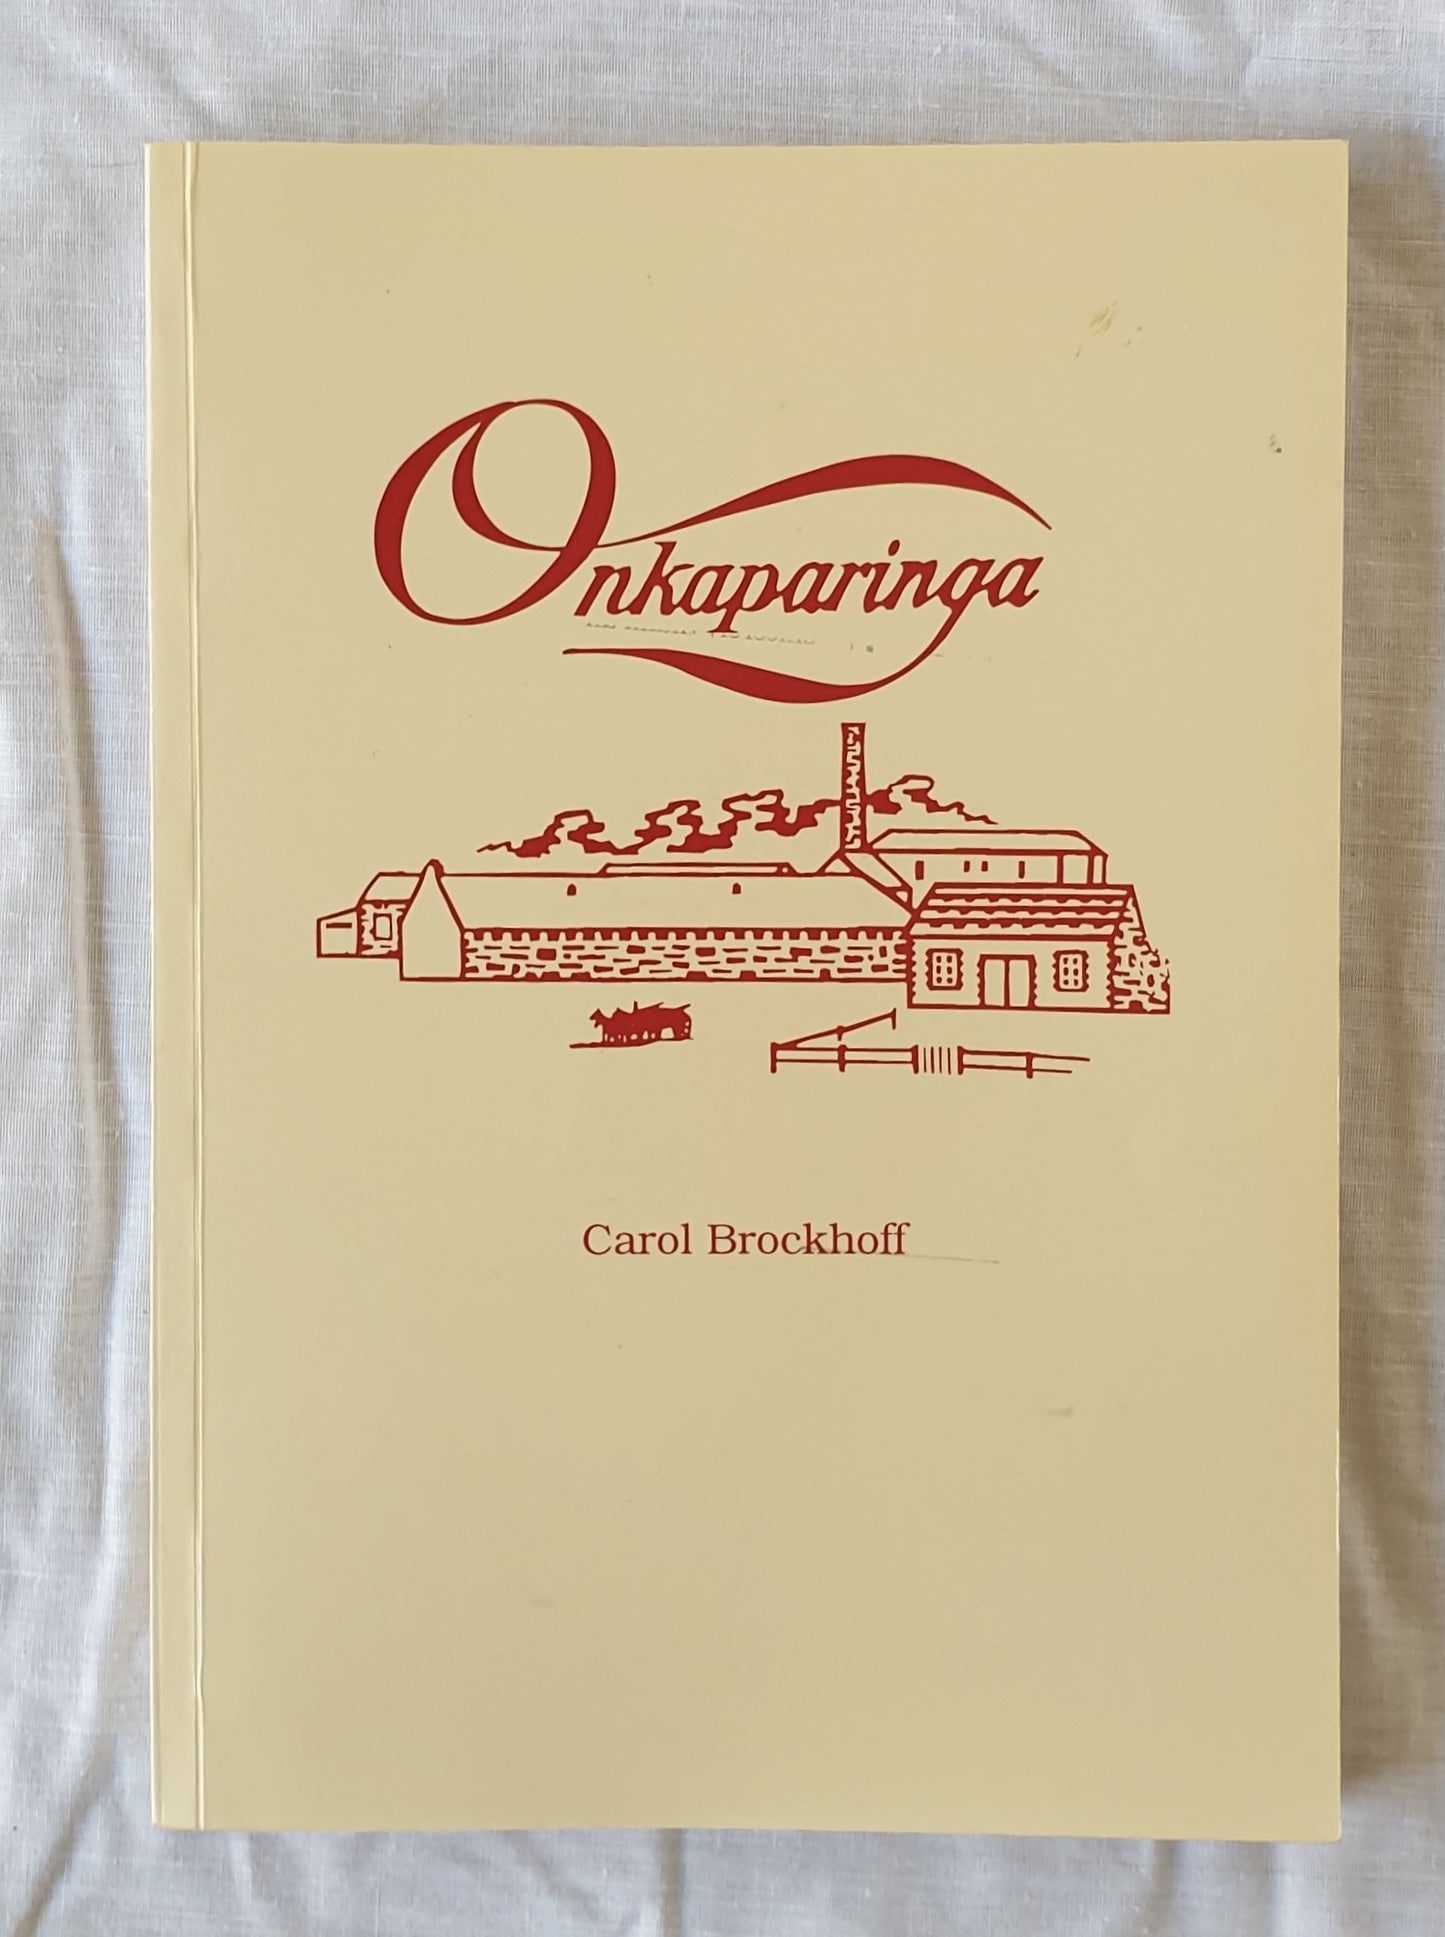 Onkaparinga The Story of a Mill by Carol Brockoff